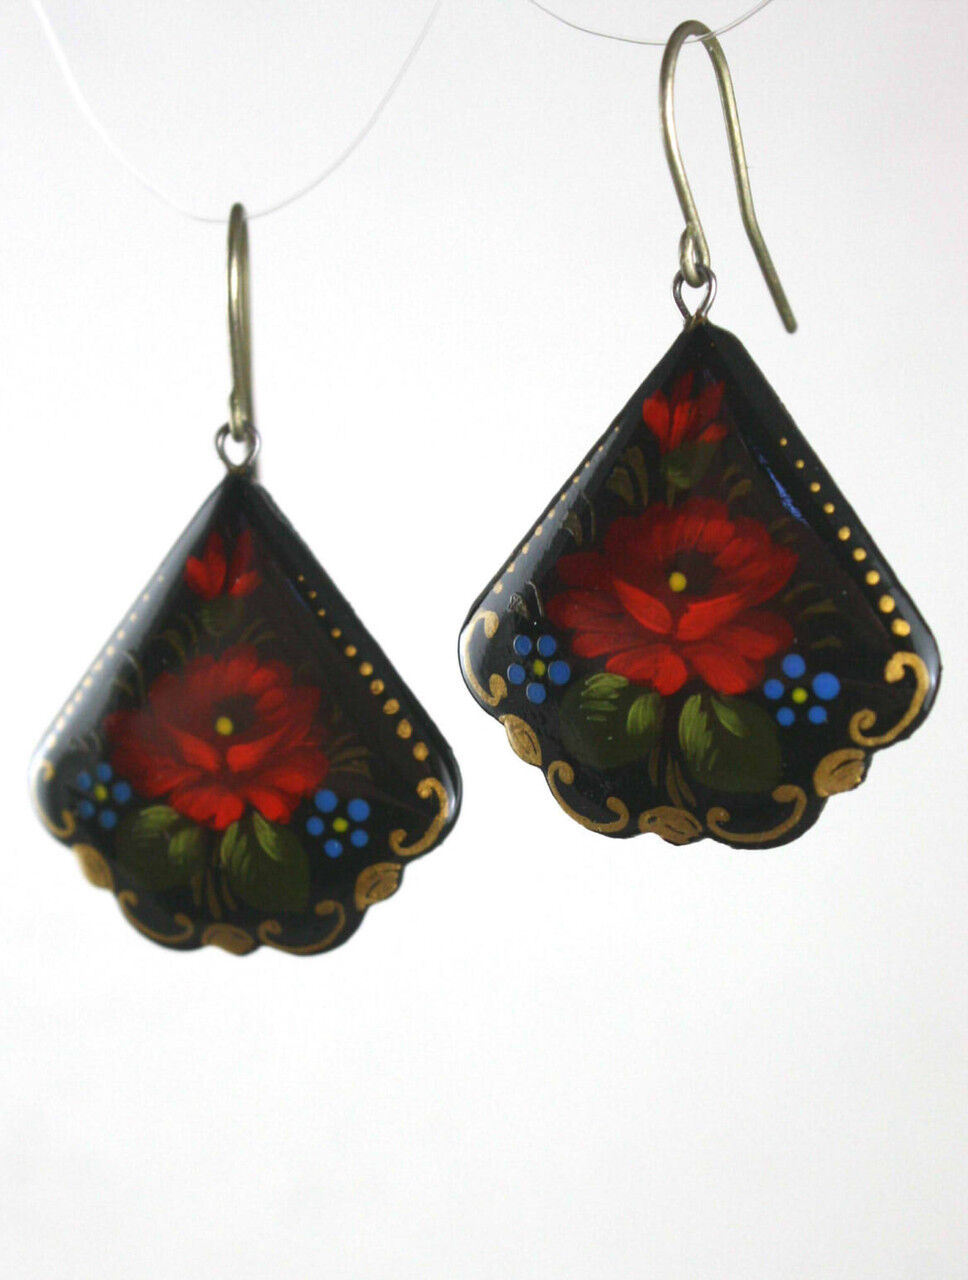 Russian Hand-Painted Black Earrings with Red Flowers